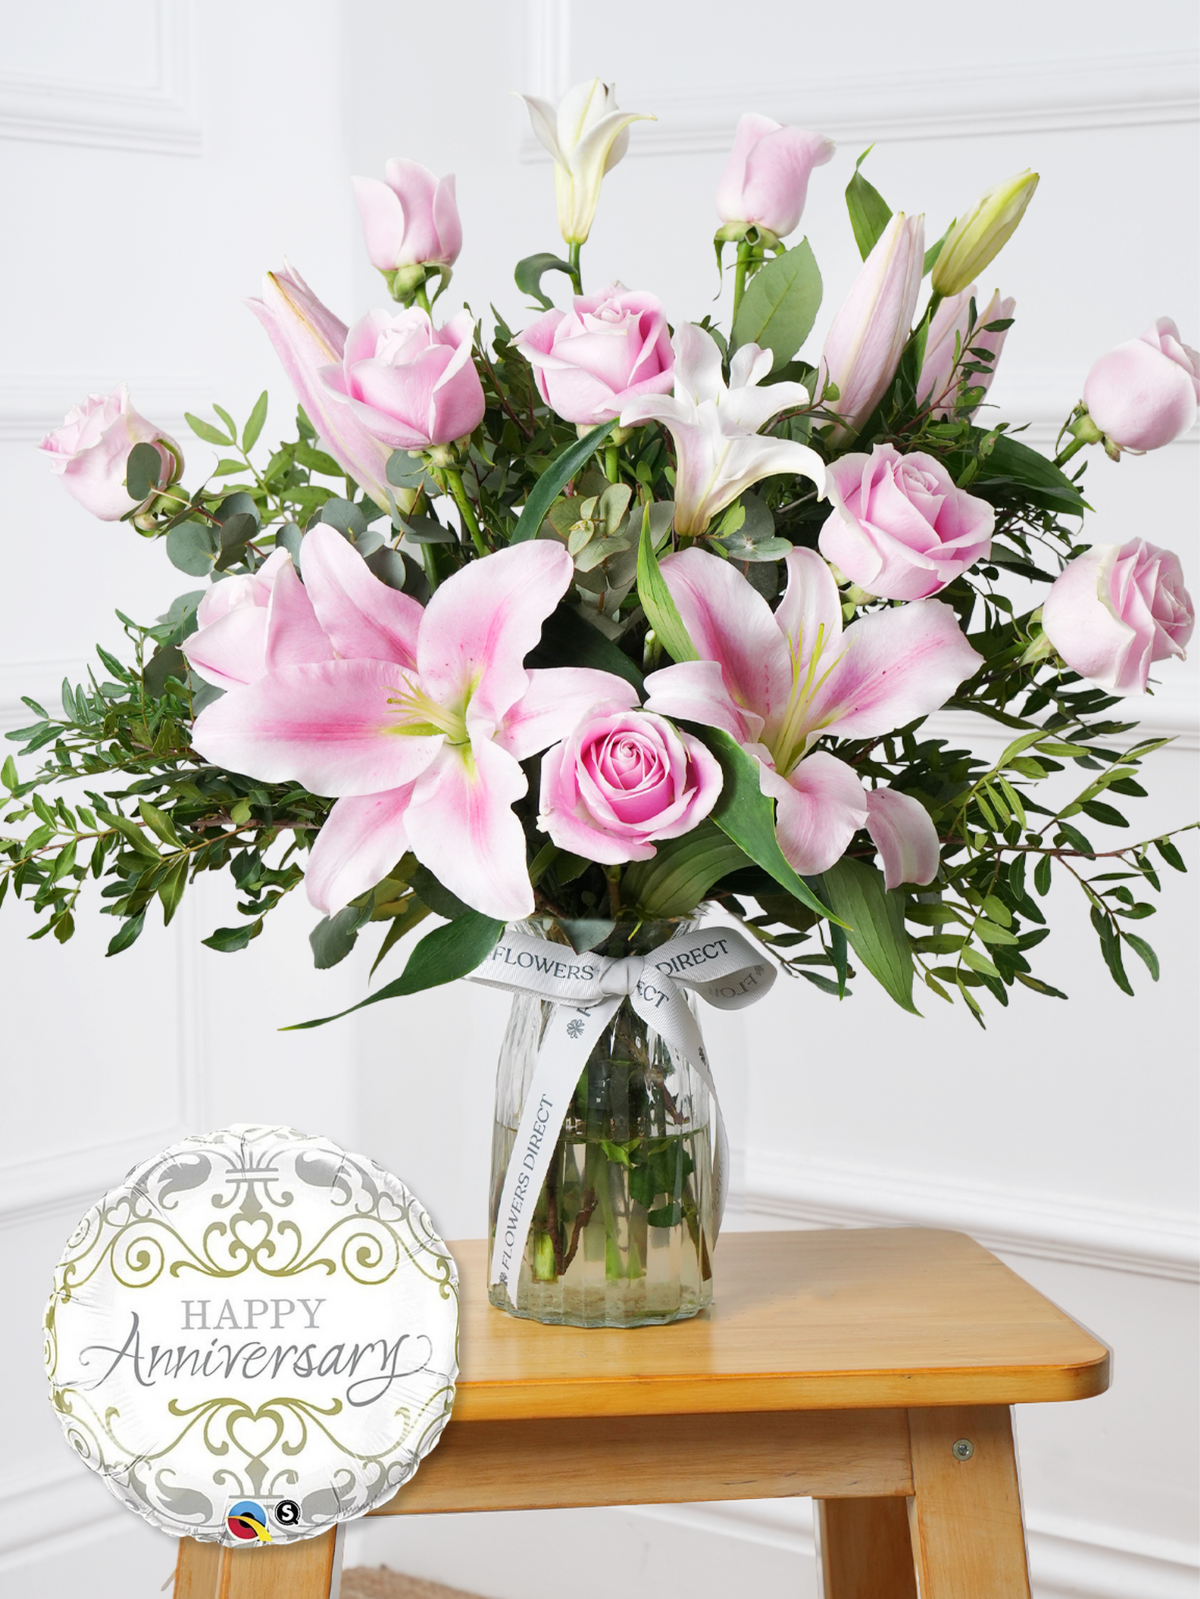 Pink Roses and Pink Lily - Vase with Free Anniversary Balloon